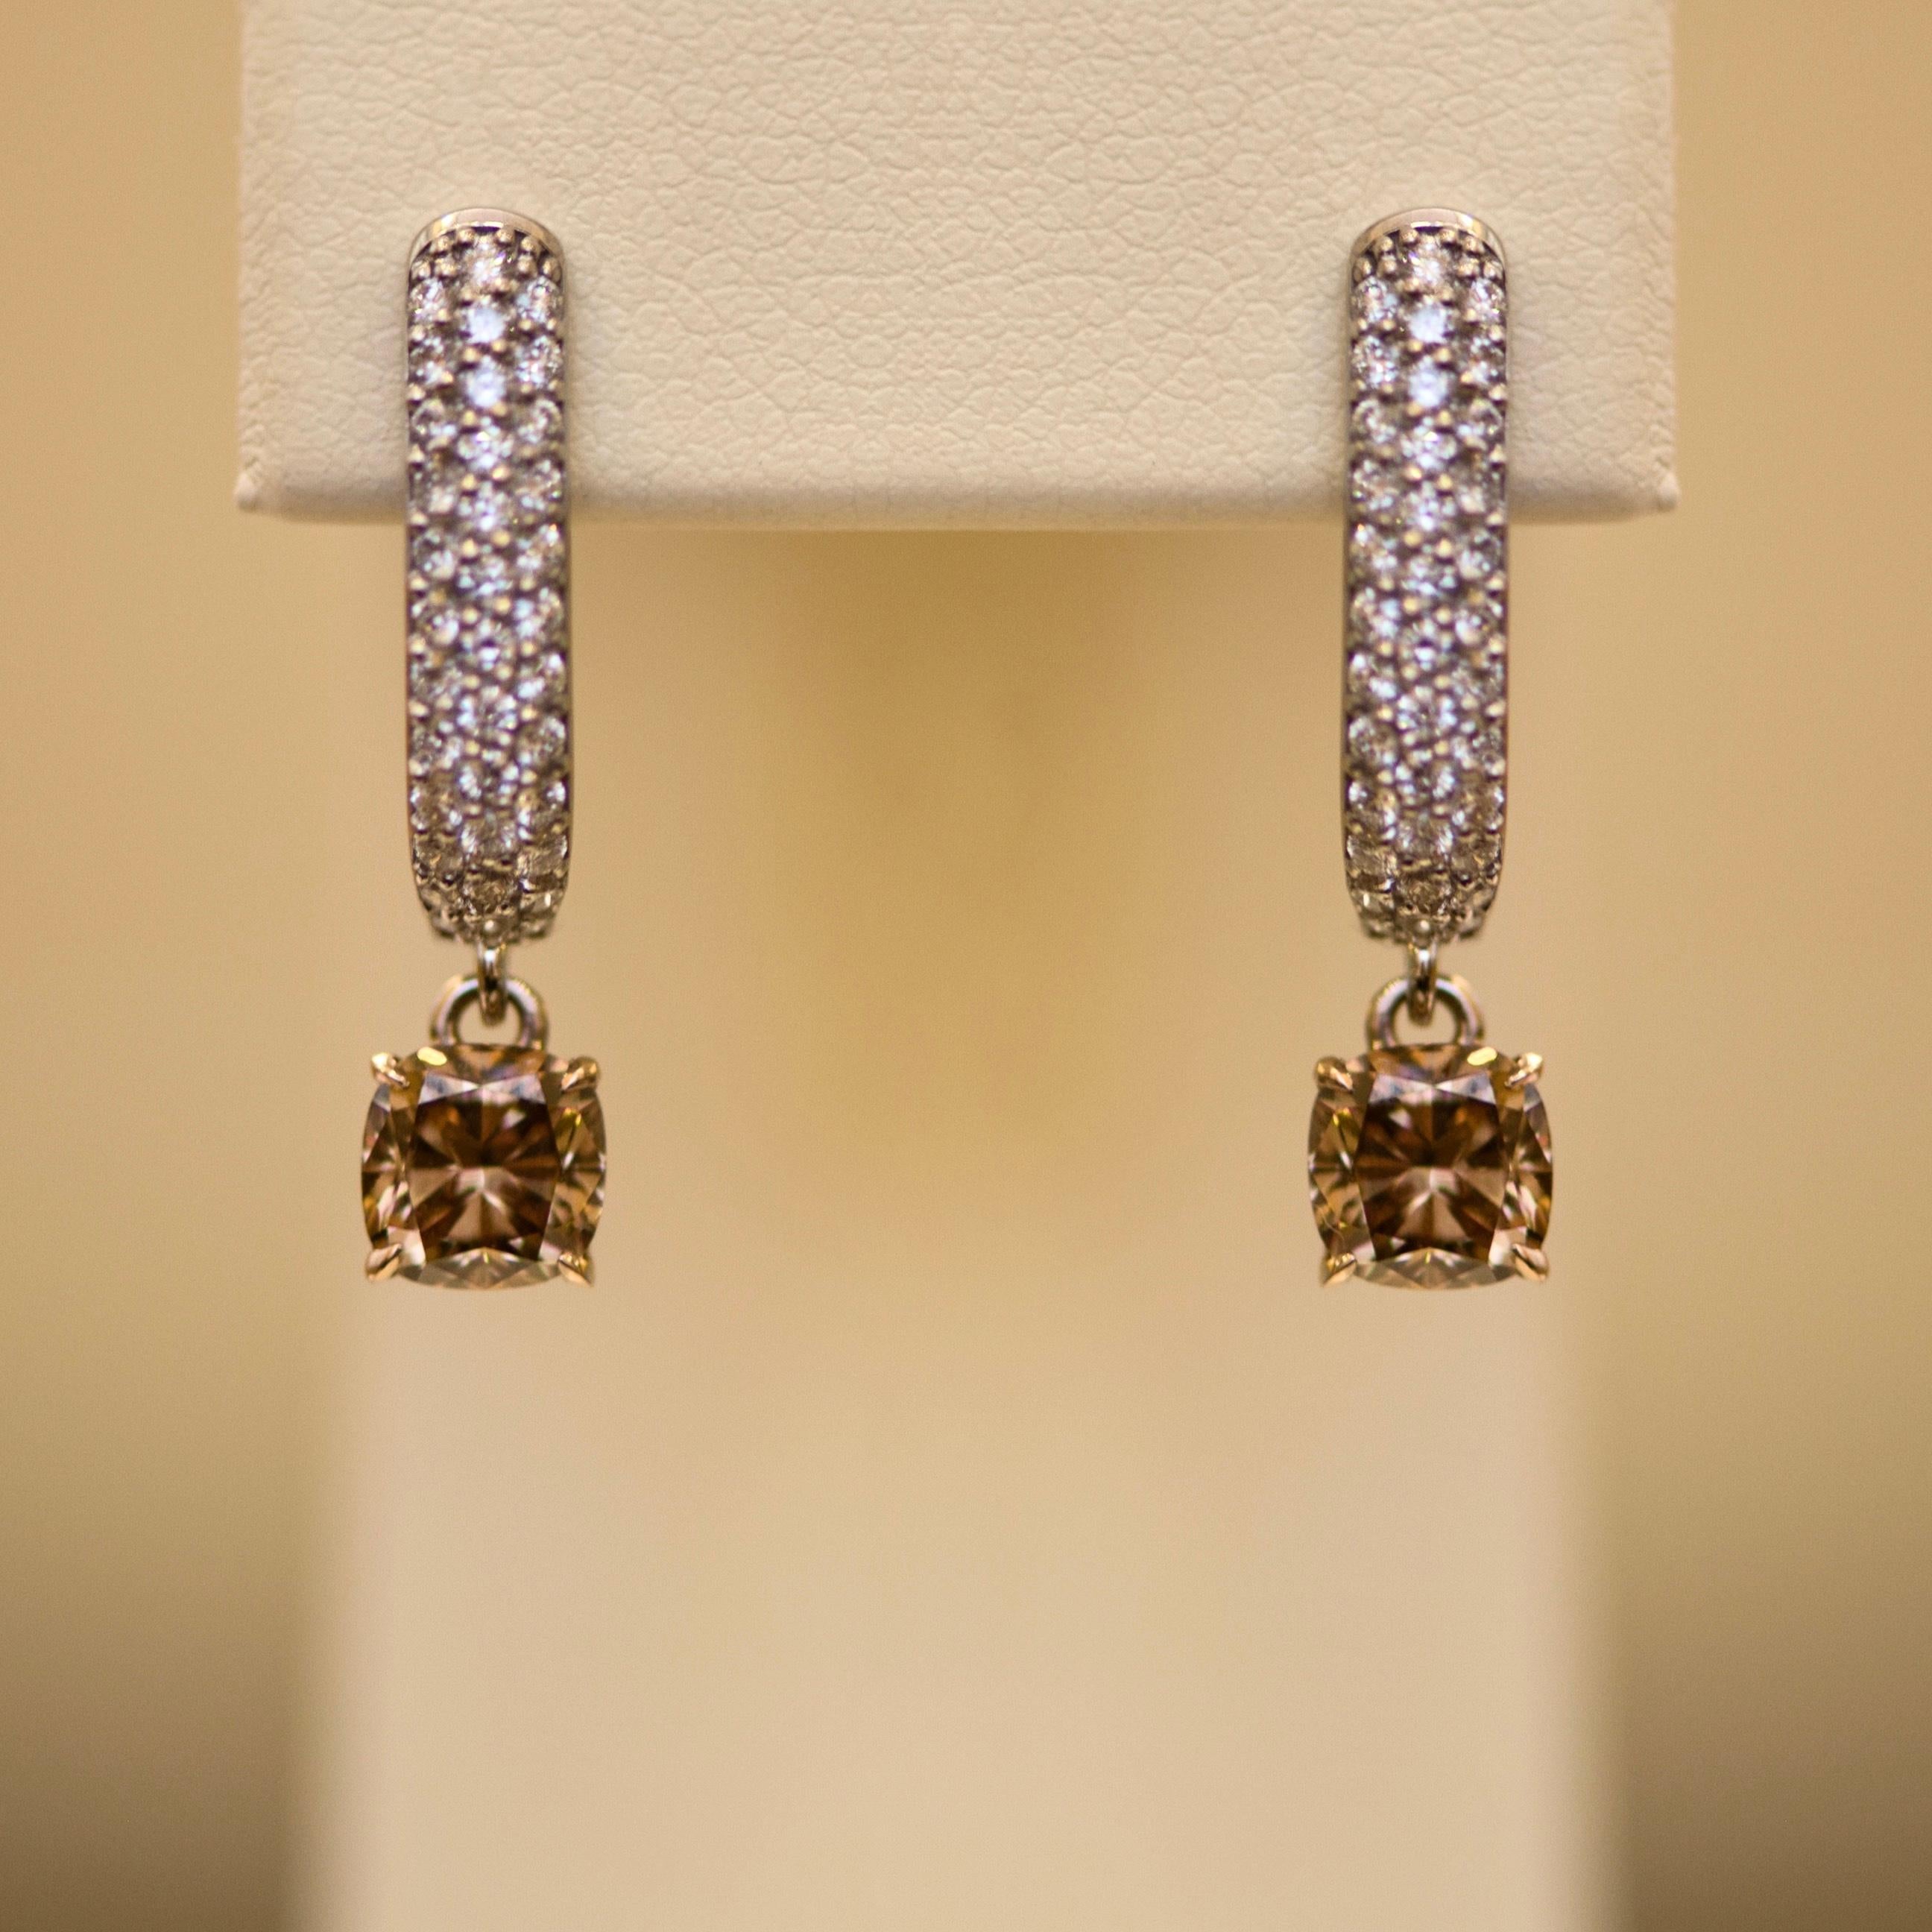 Diamond is the best choice if you are looking for something that will be glittering and very attractive. Also diamonds are rare, valuable, and, by the way, the most popular stones in the world. This earrings - idea for the present for yourself. 
The